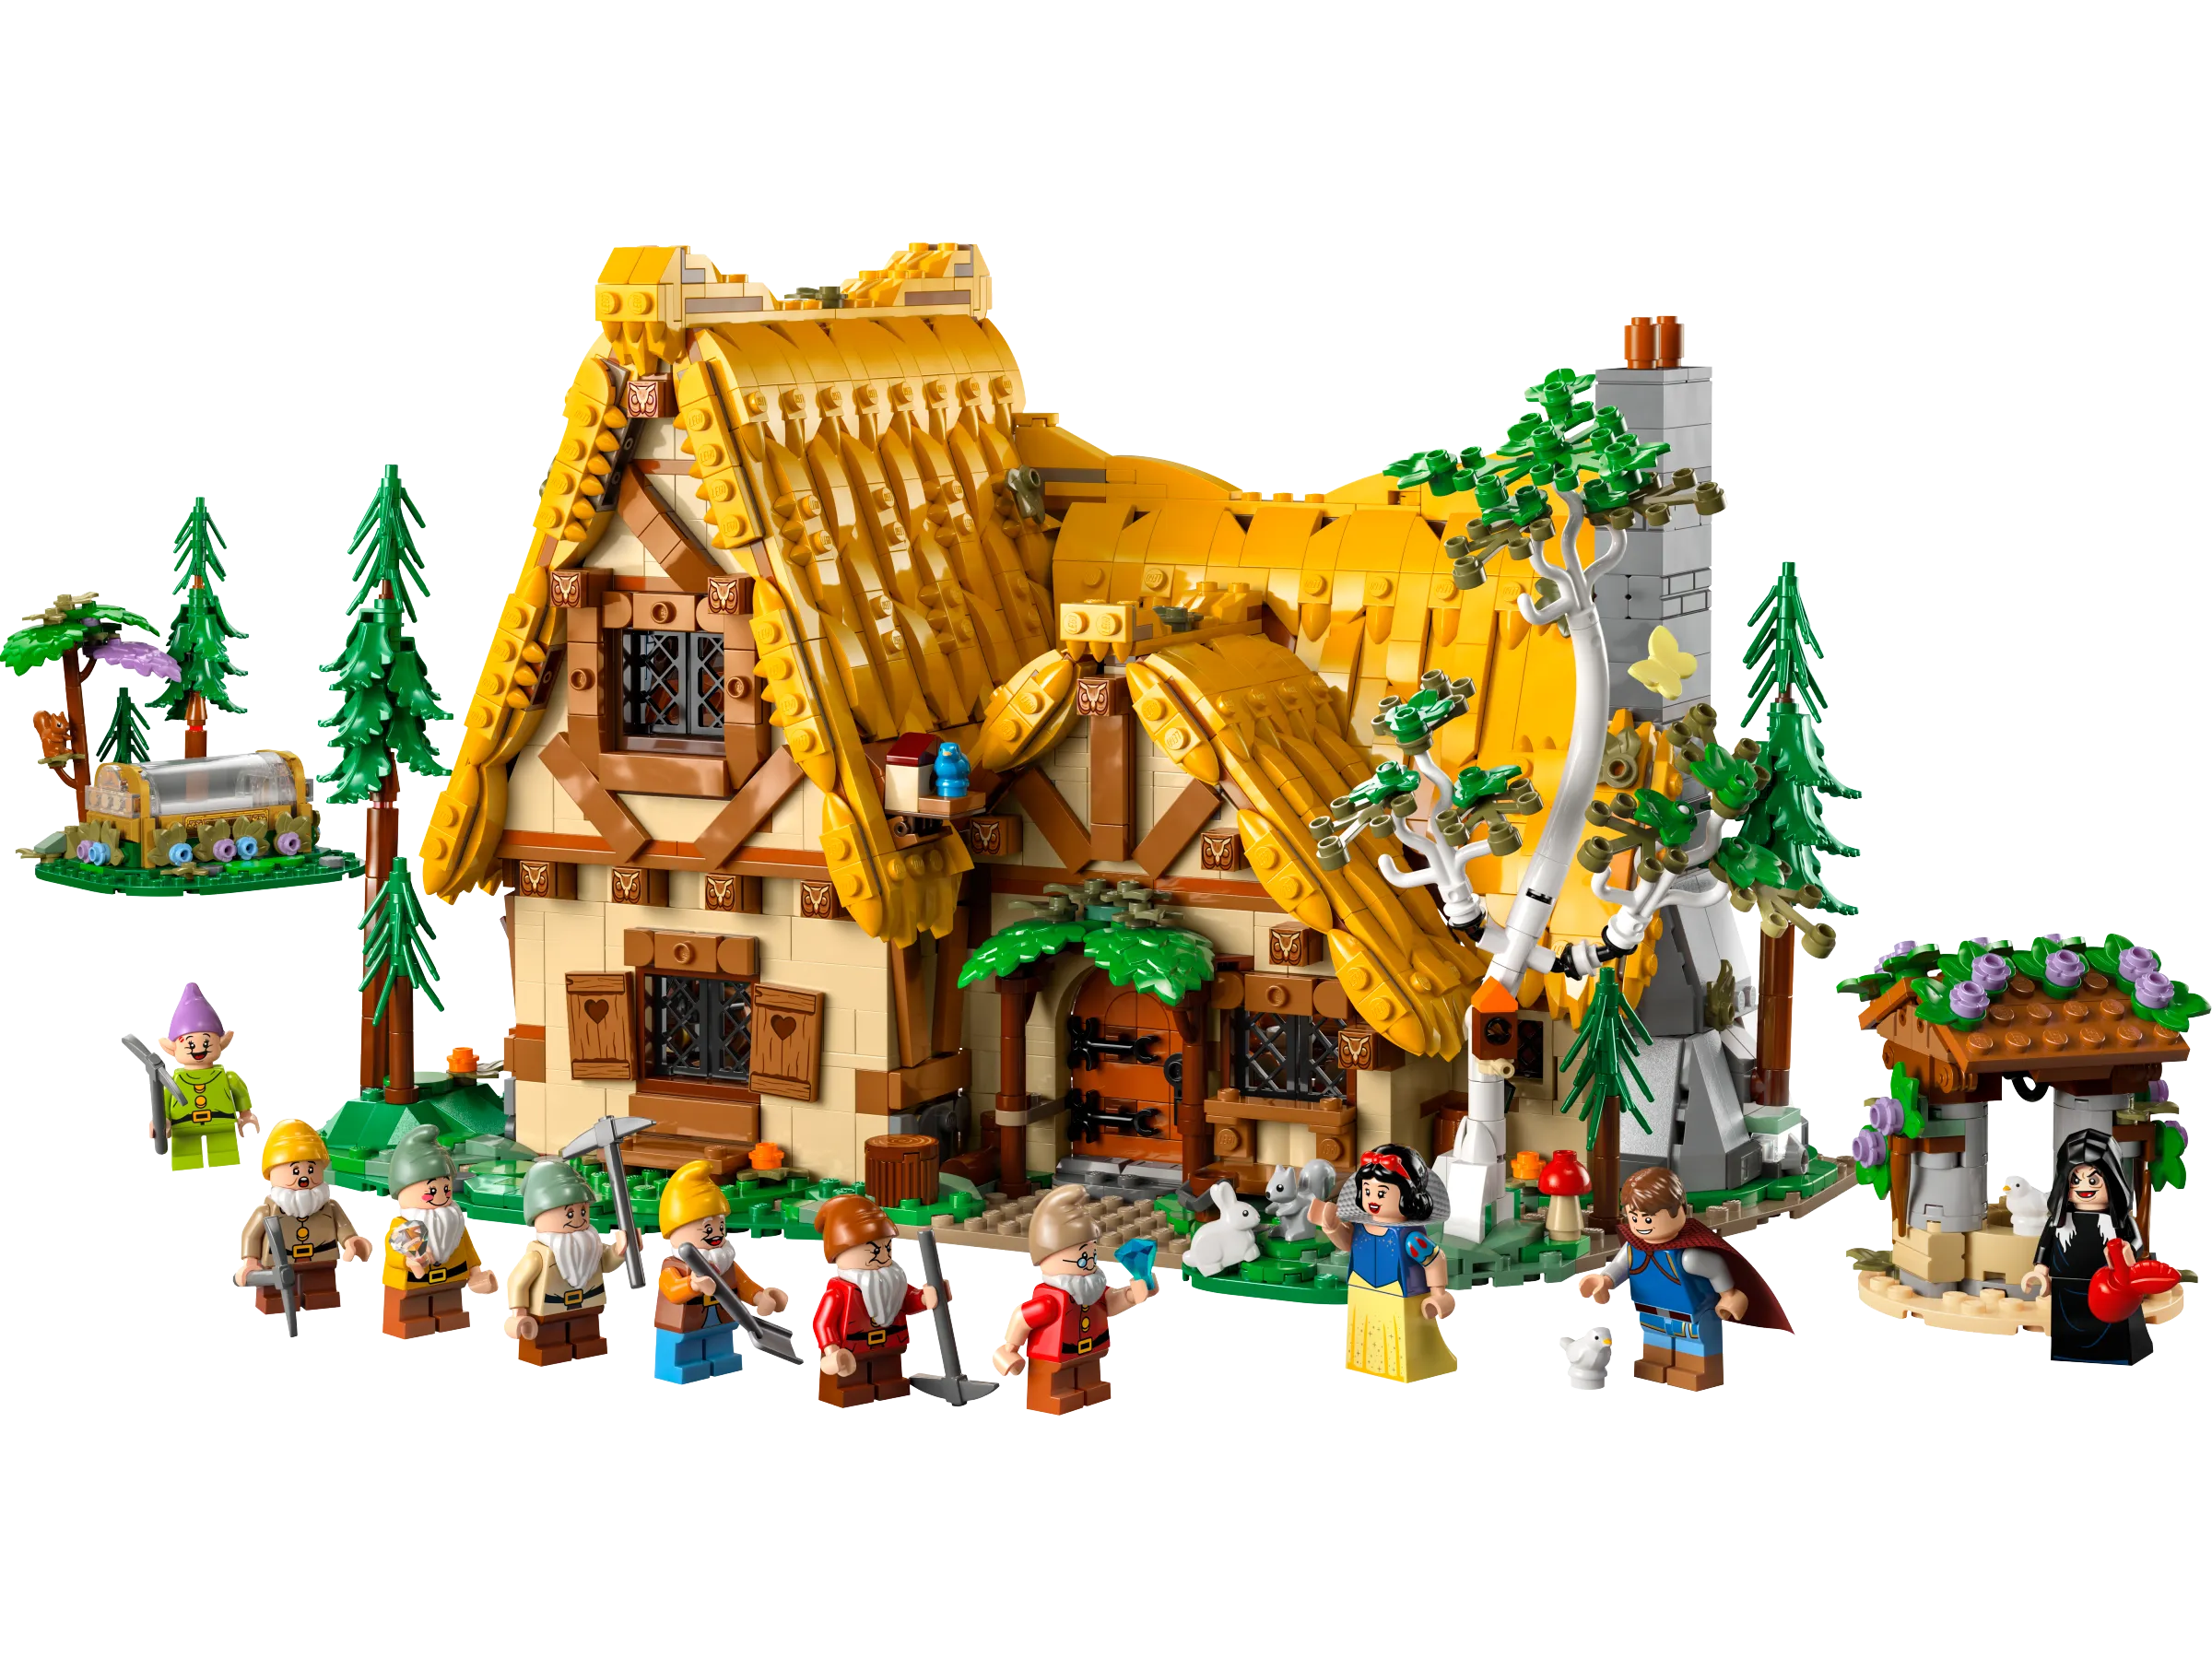 LEGO Rapunzel's Tower & The Snuggly Duckling Set 43241